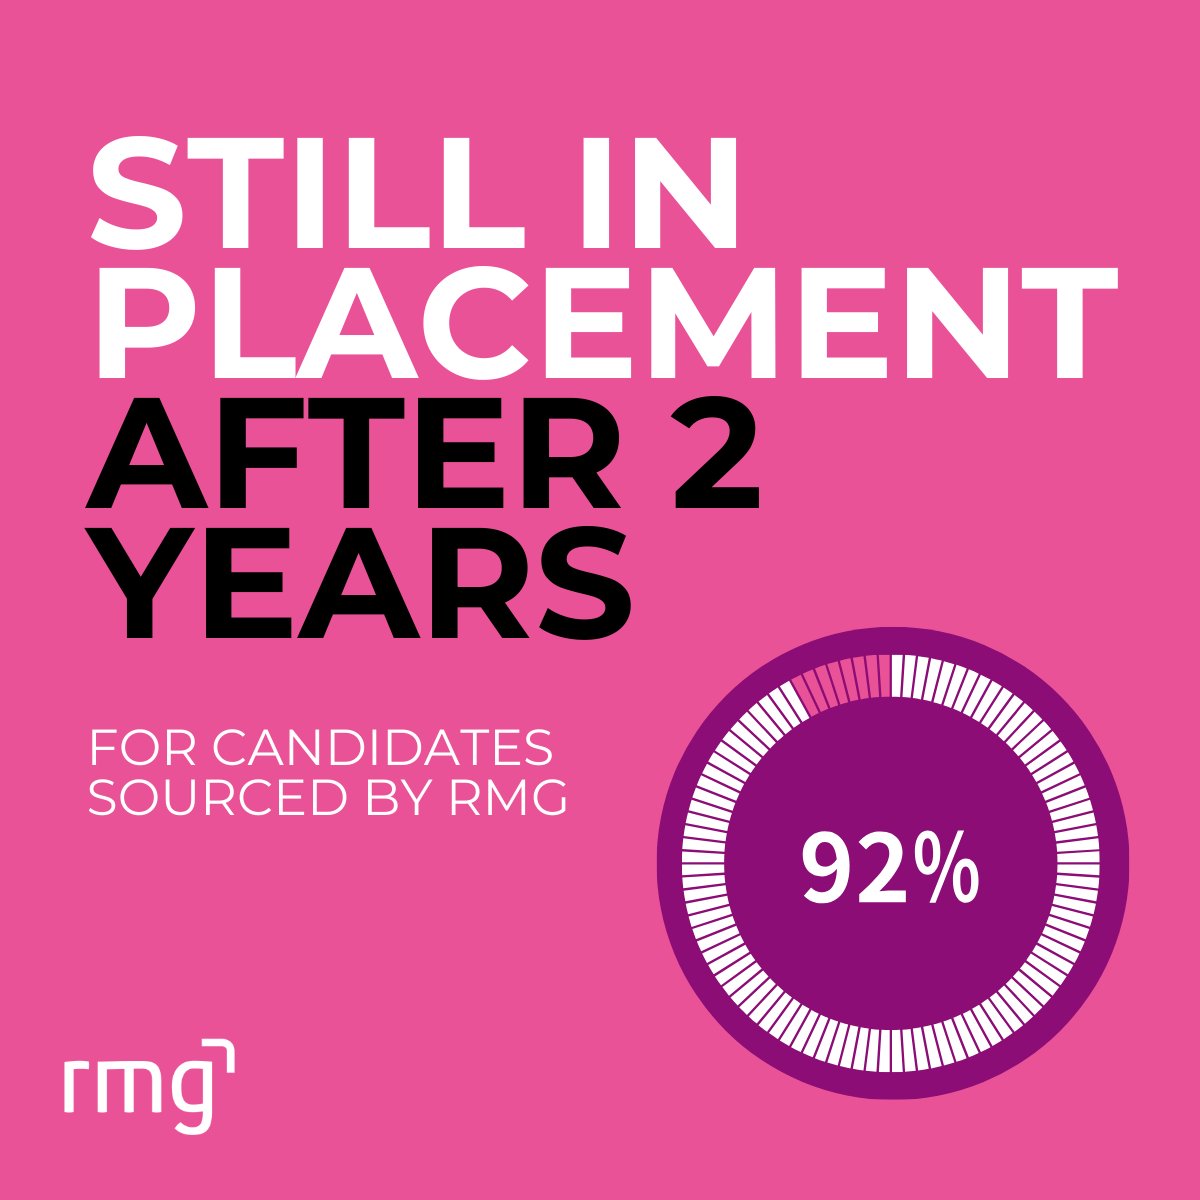 🌟 92% of our design placements thrive in their roles for over 2 years! Let us find you lasting talent for:
UI/UX Designers
Graphic Designers
Product Designers
Content Designers
Ready for a top-notch team? Contact us! 🚀
#RMGDigital #TechTrends #CareerInsights #UXDesign